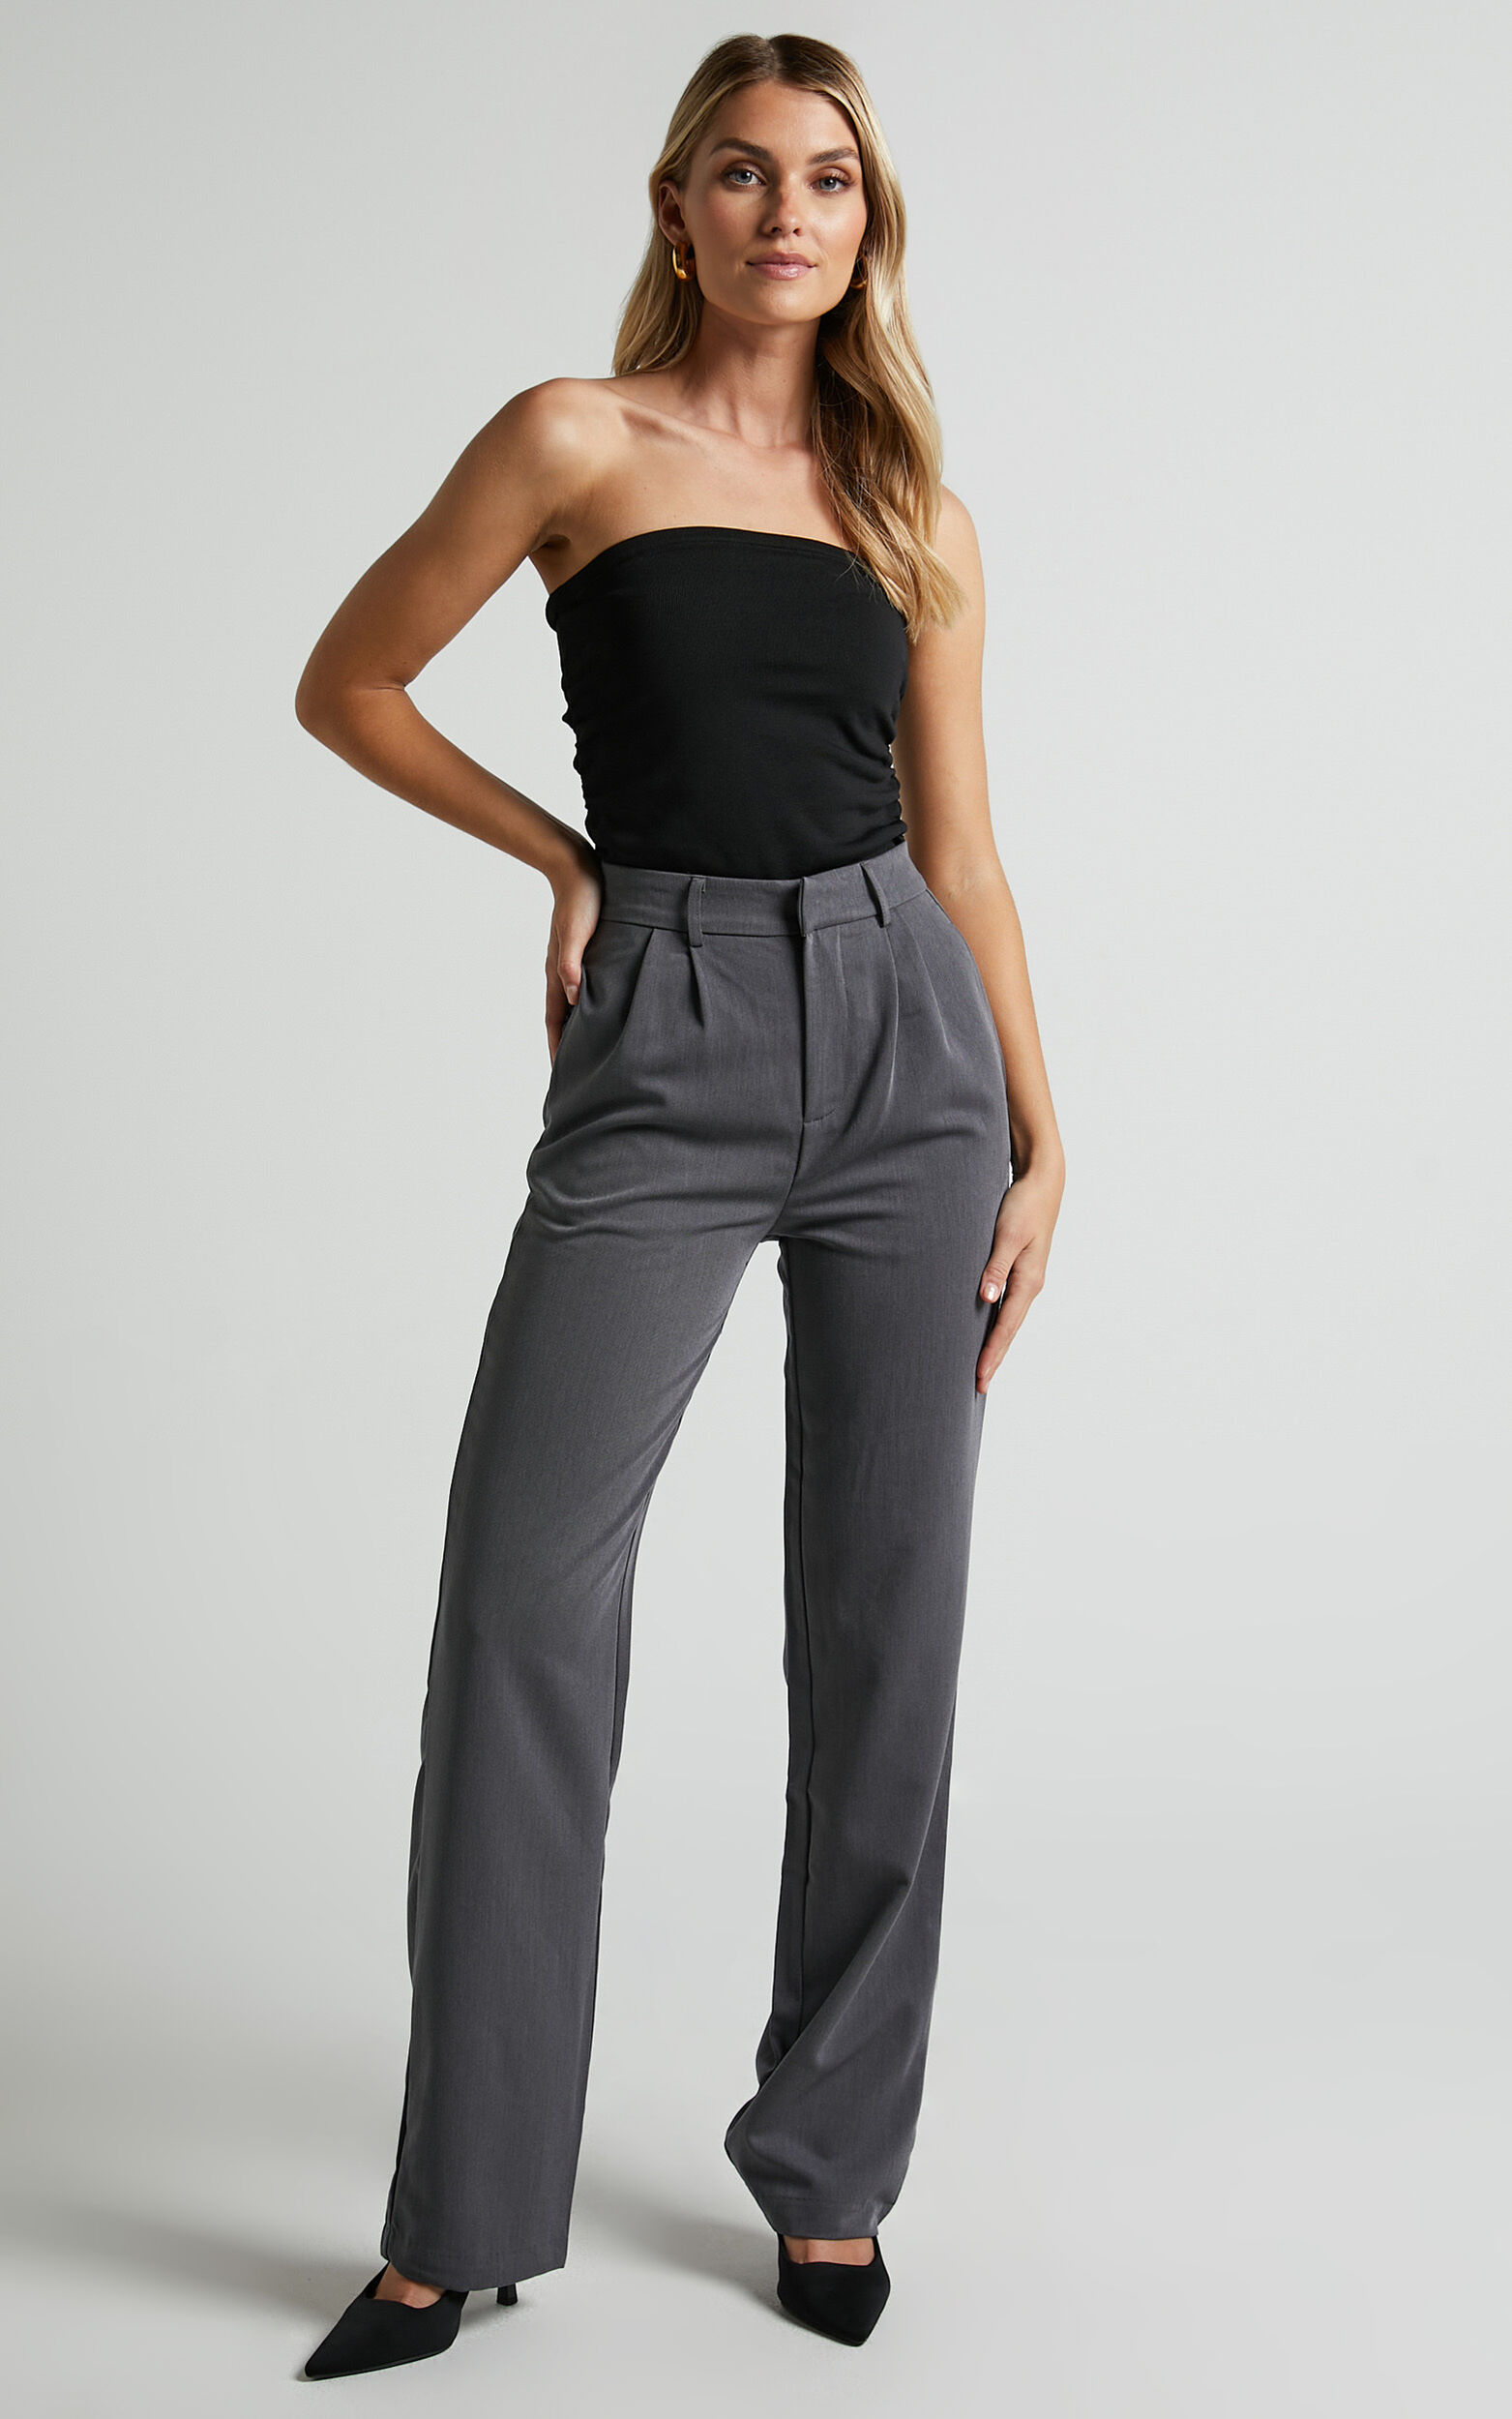 Lorcan Pants - High Waisted Tailored Pants in Charcoal - 04, GRY3